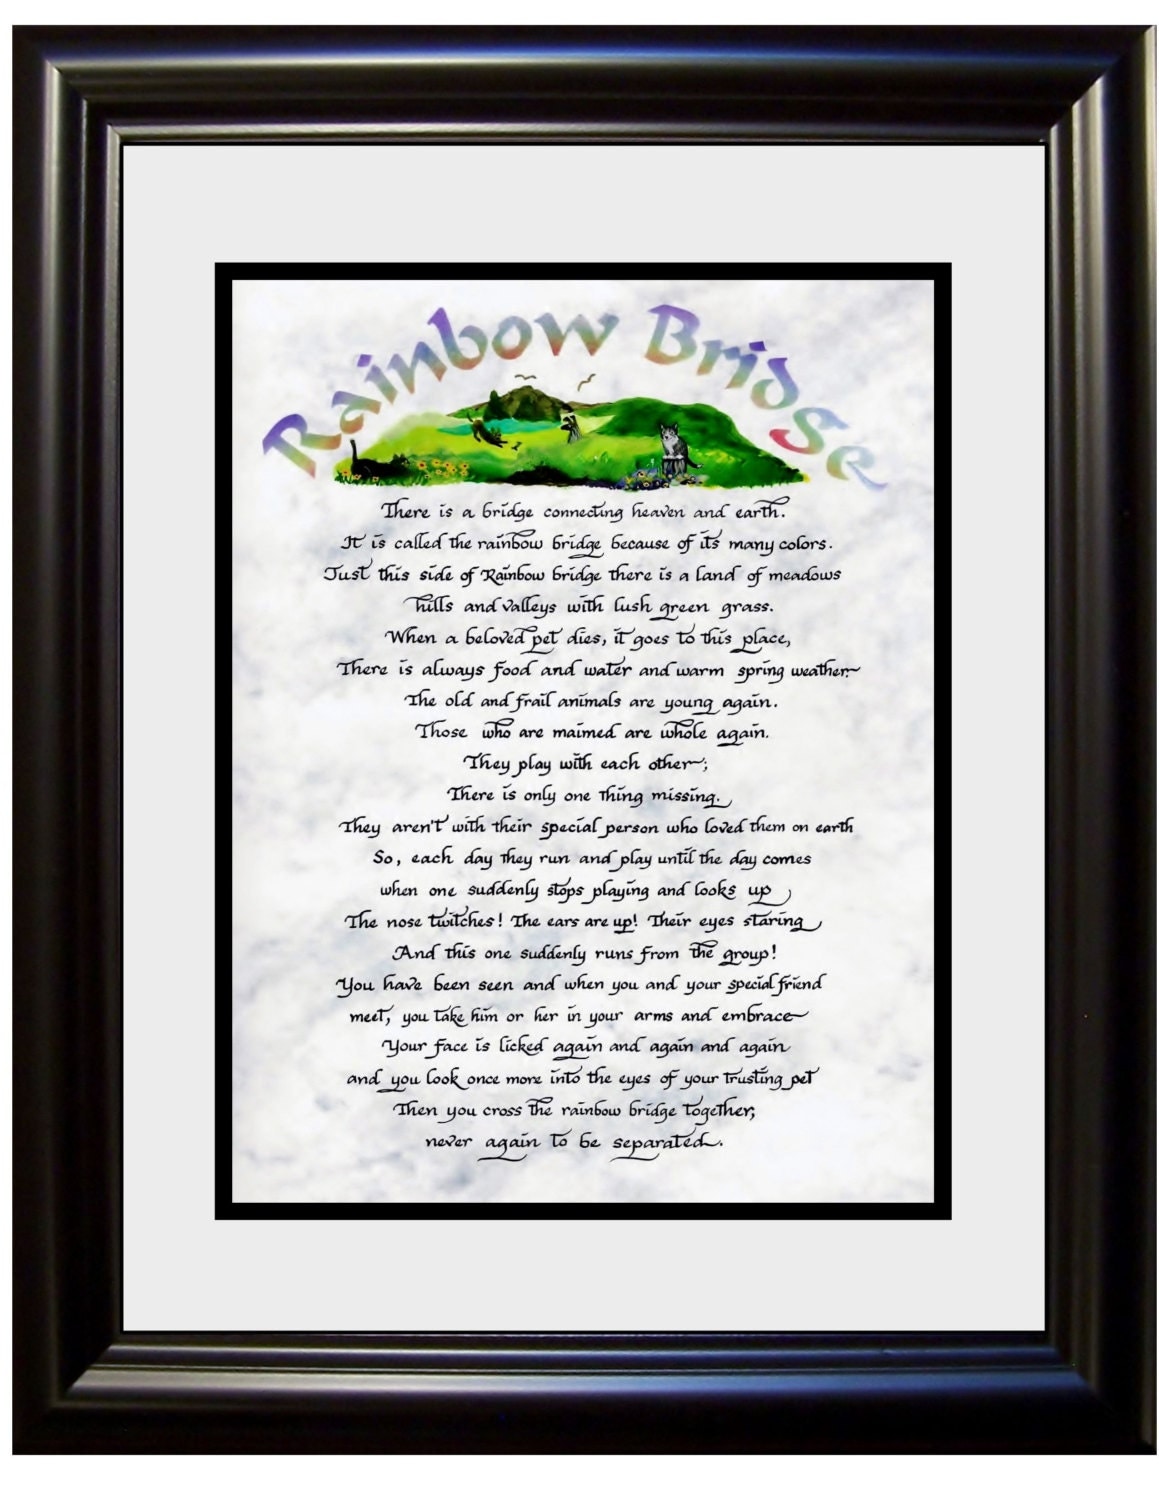 rainbow bridge pet poem personalized and framed for those who